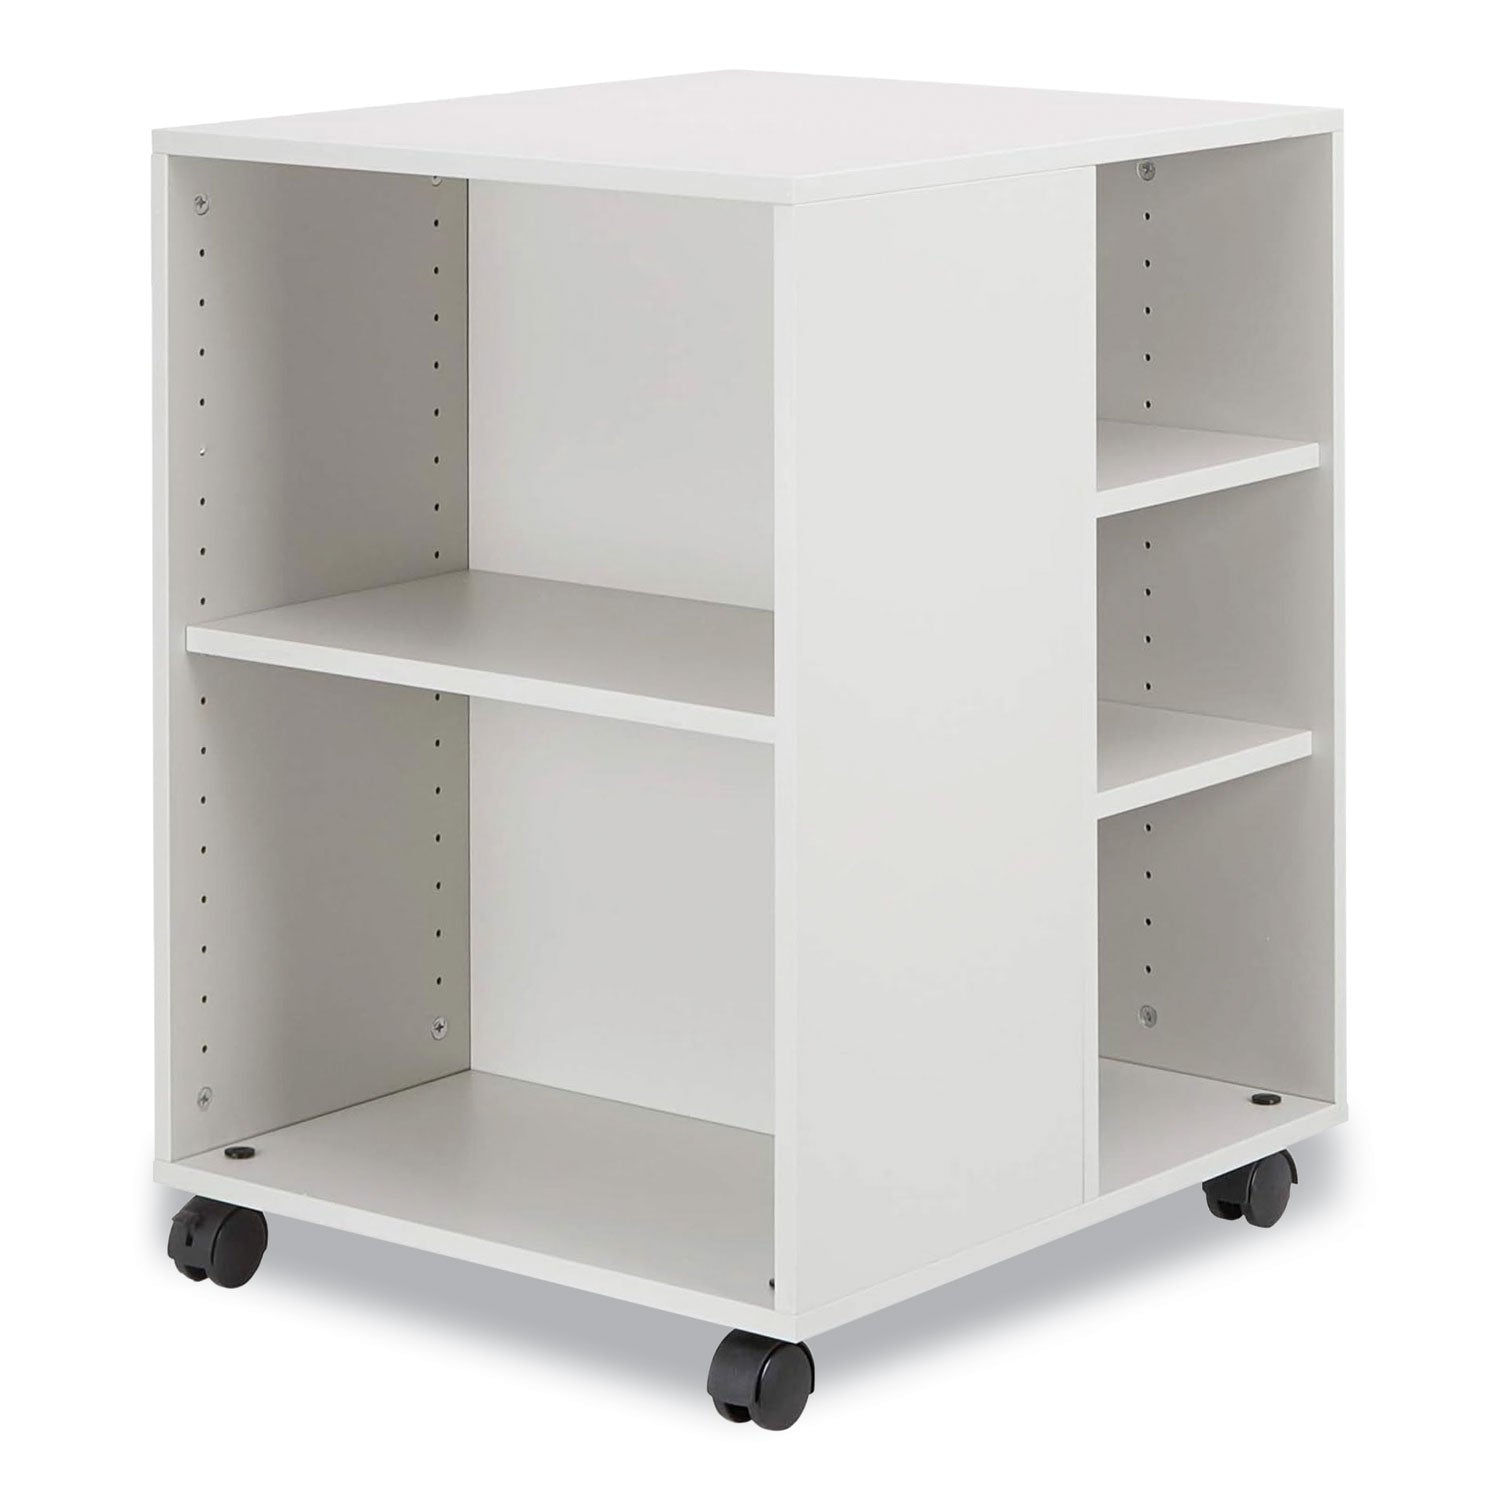 flexible-multi-functional-cart-for-office-storage-wood-6-shelves-2079-x-2331-x-2945-white_dbl311302 - 1